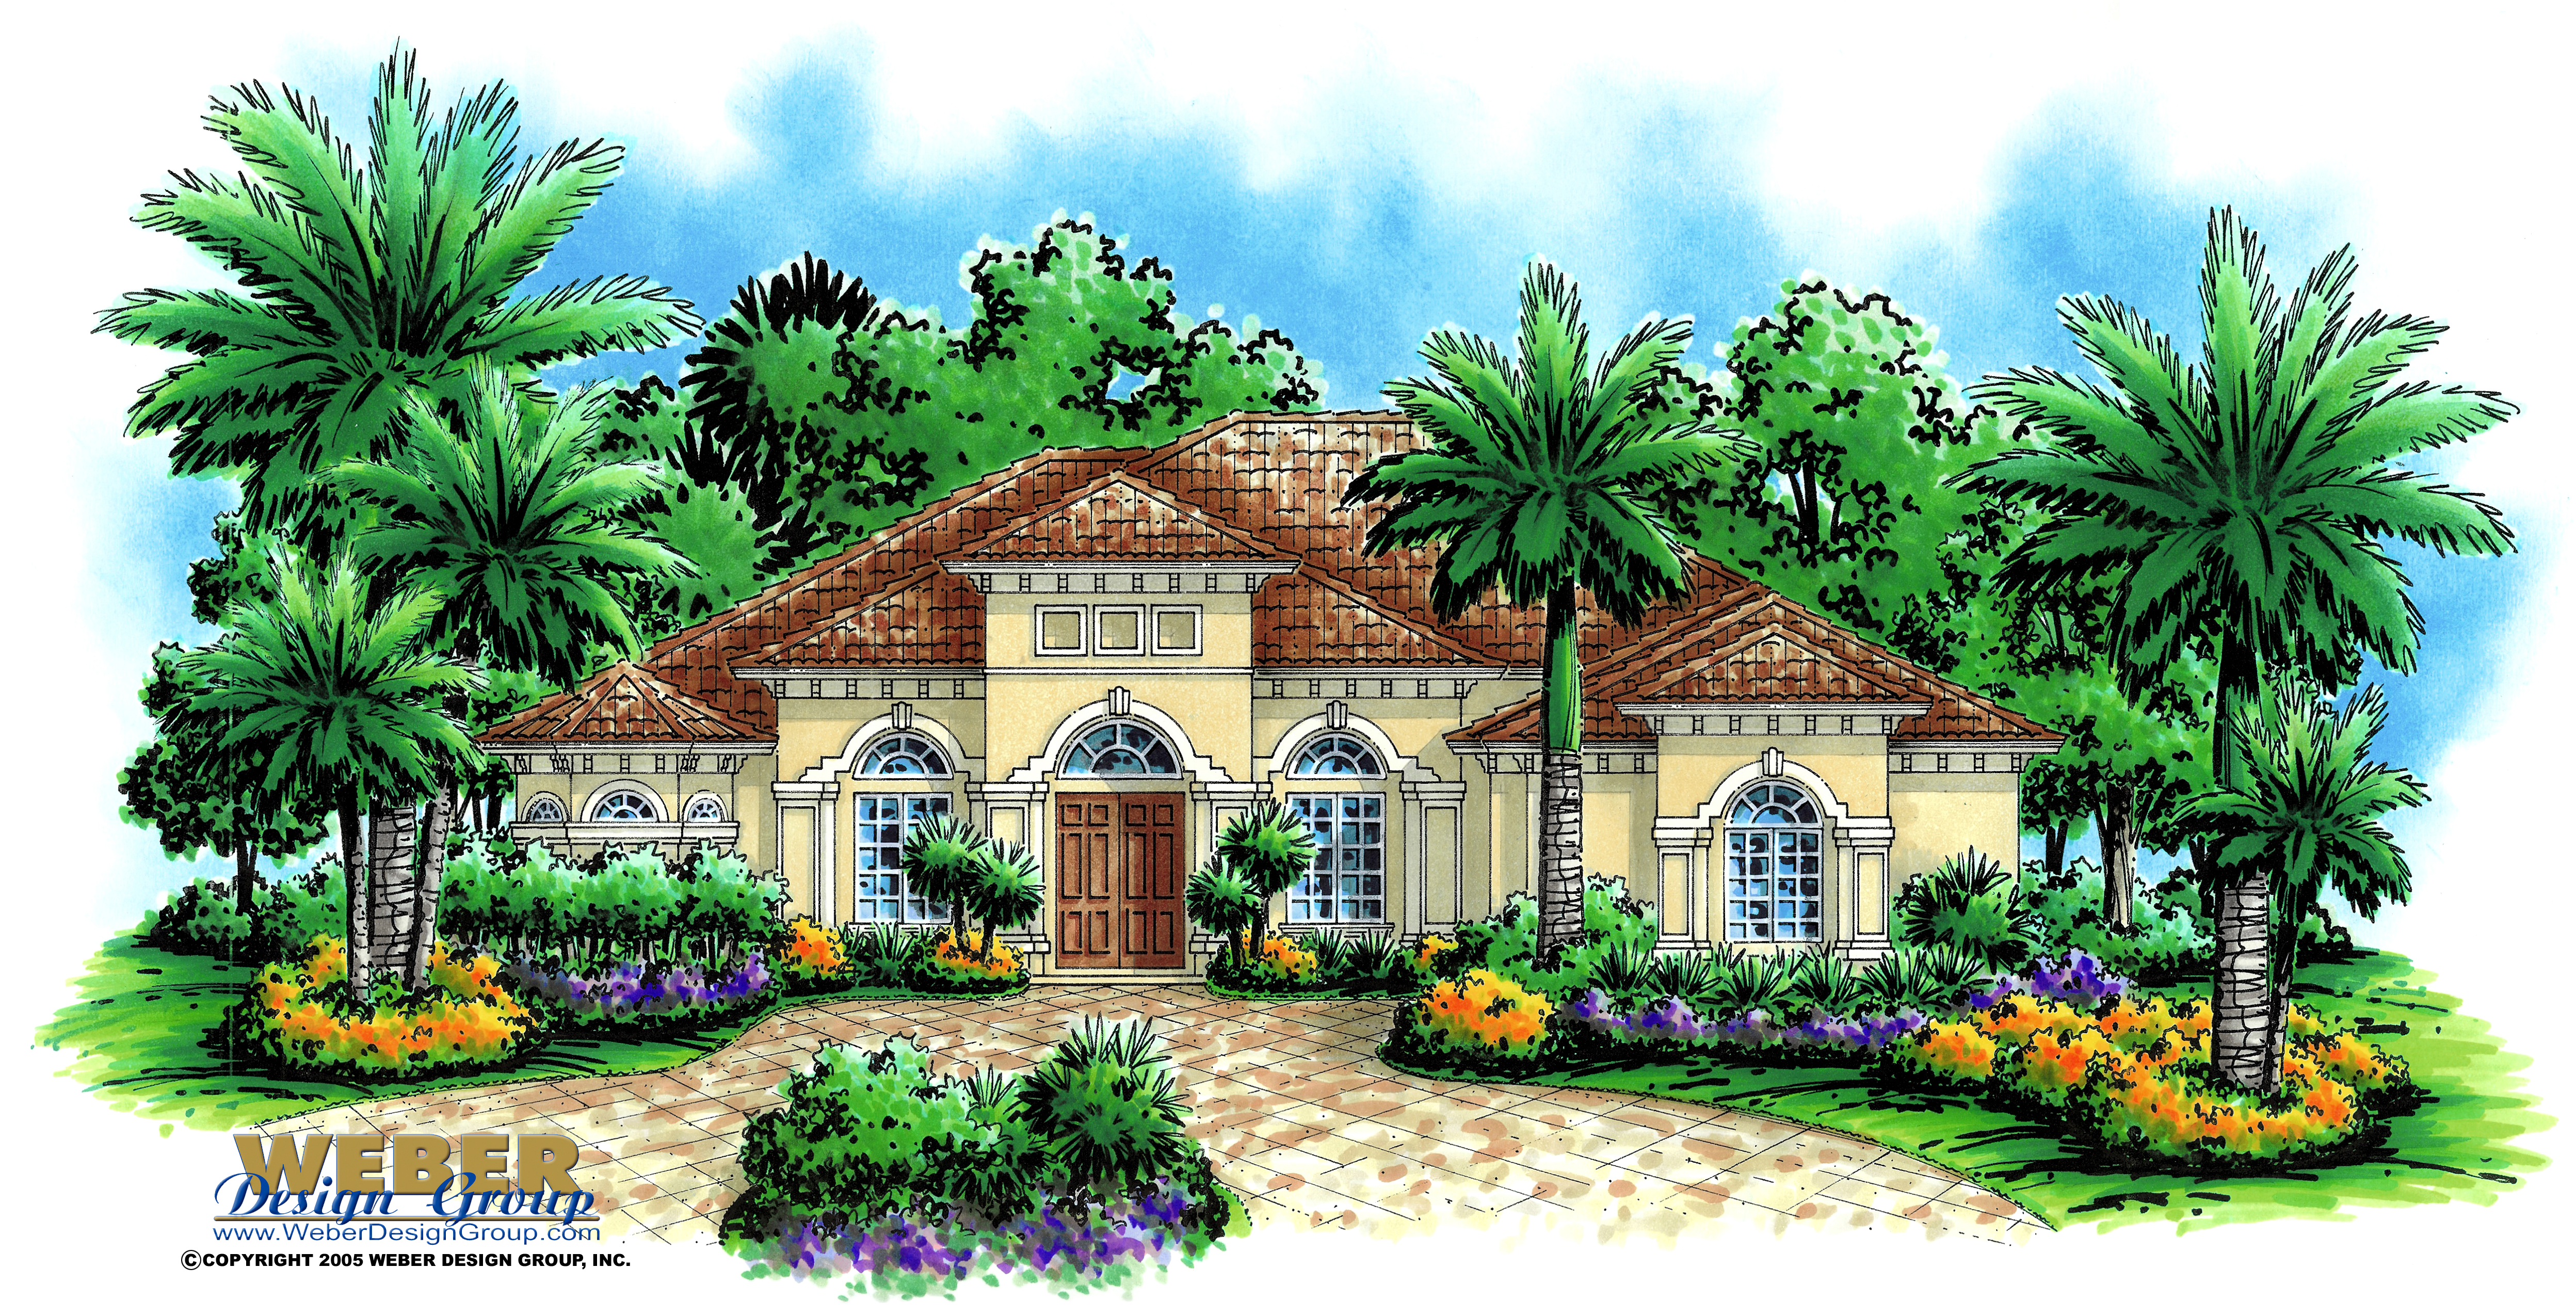 Stanley Homes is Now building in San Marino Estates, Melbourne FL